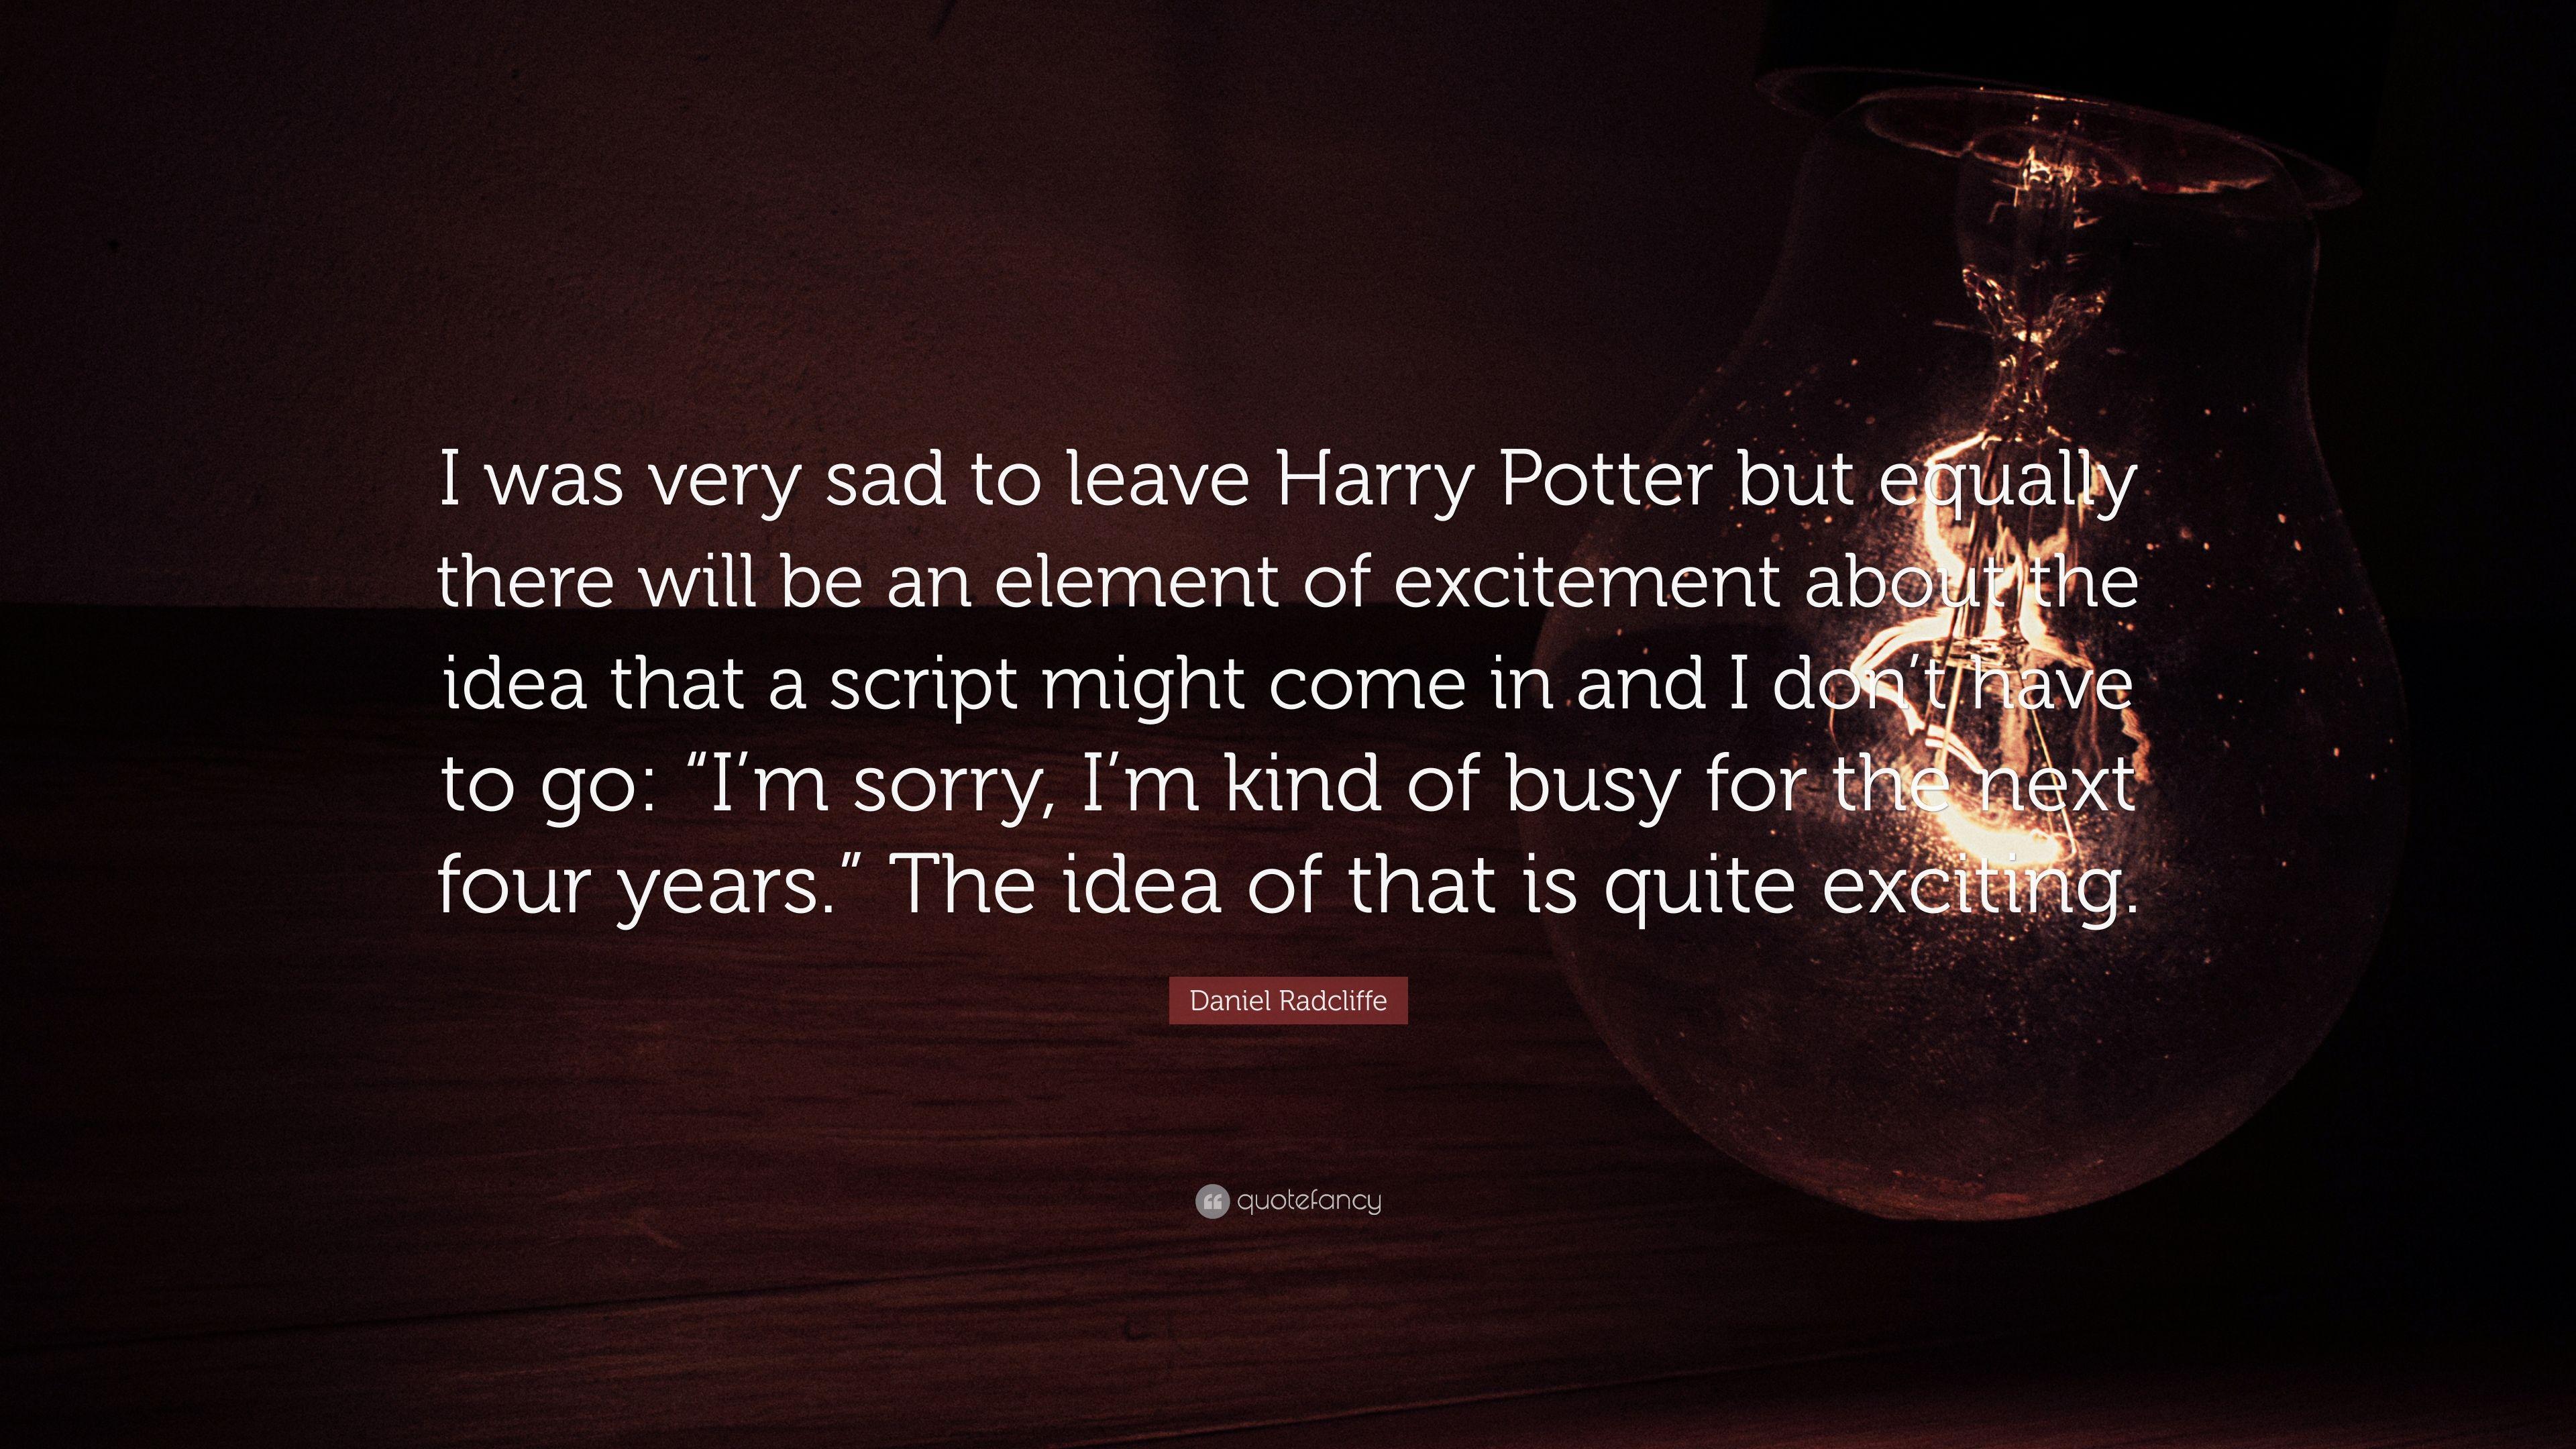 These Harry Potter Quotes Might Make Your Kid a Better Person